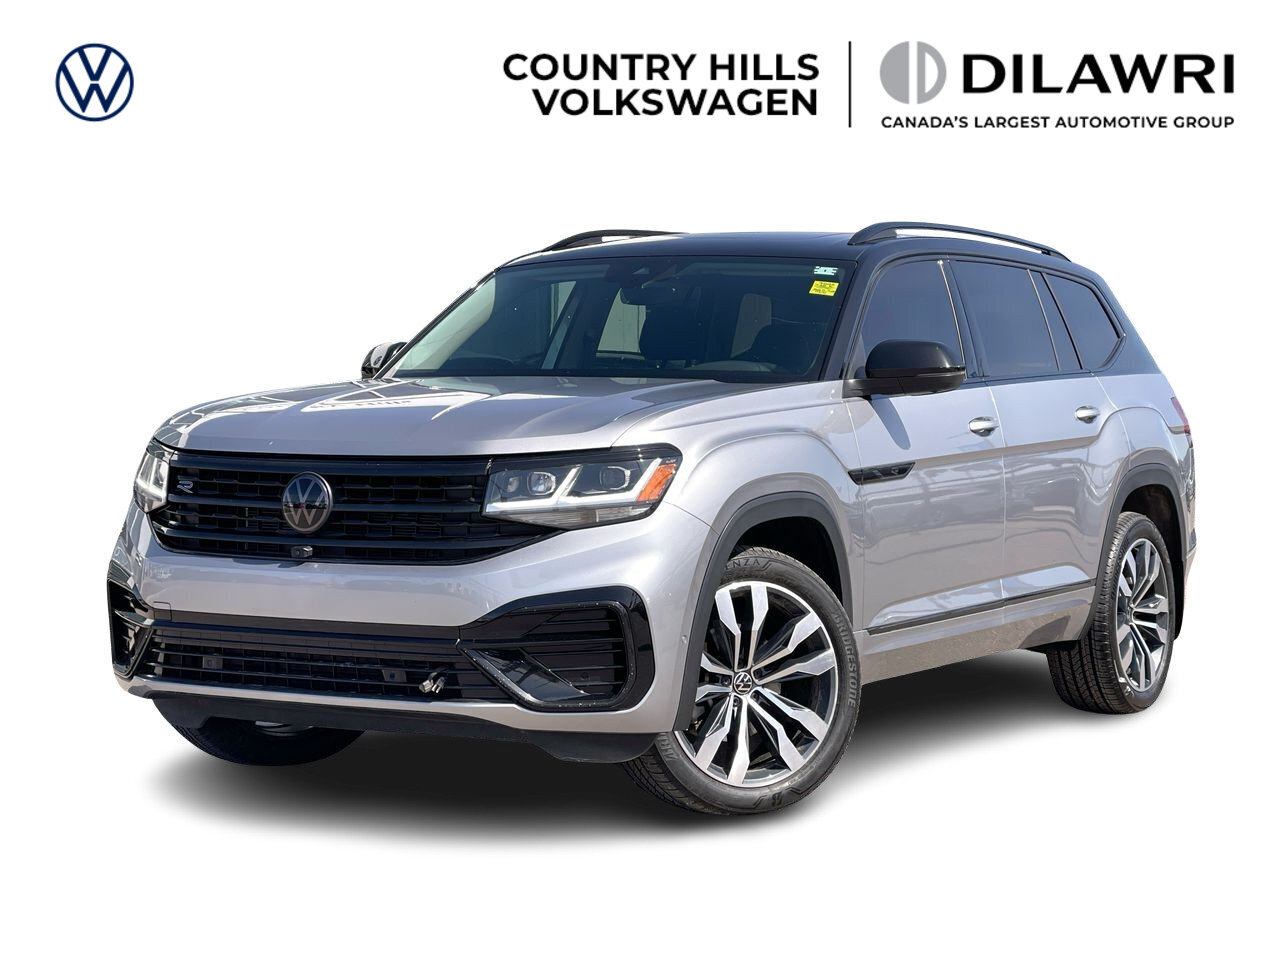 2021 Volkswagen Atlas Execline AWD 3.6L V6 Locally Owned / 